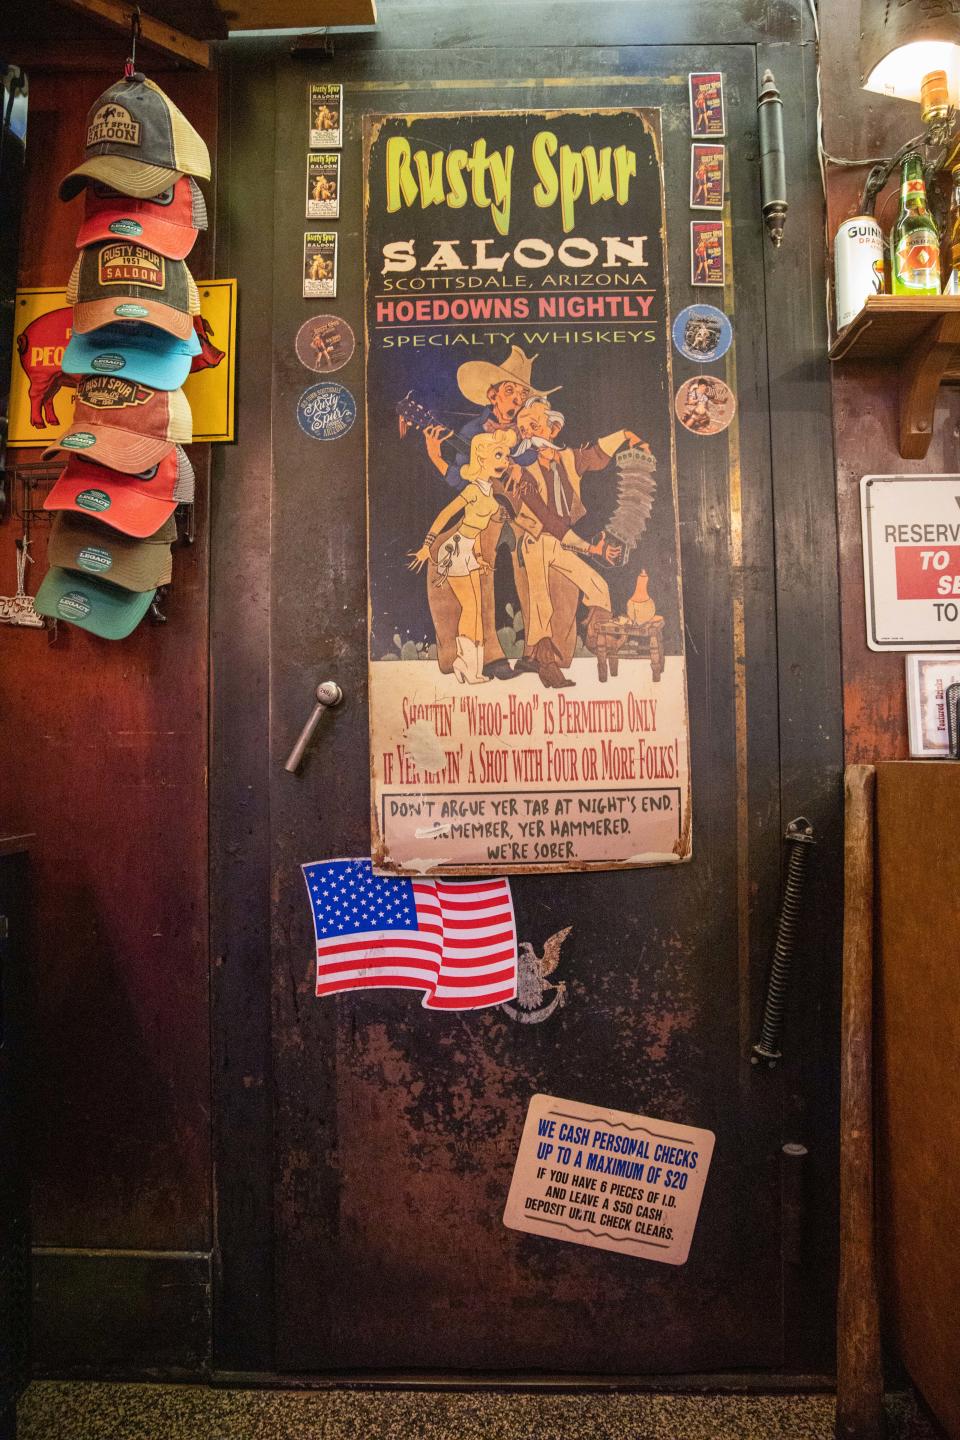 Rusty Spur Saloon's freezer used to be a bank vault, May 13, 2021, Scottsdale.